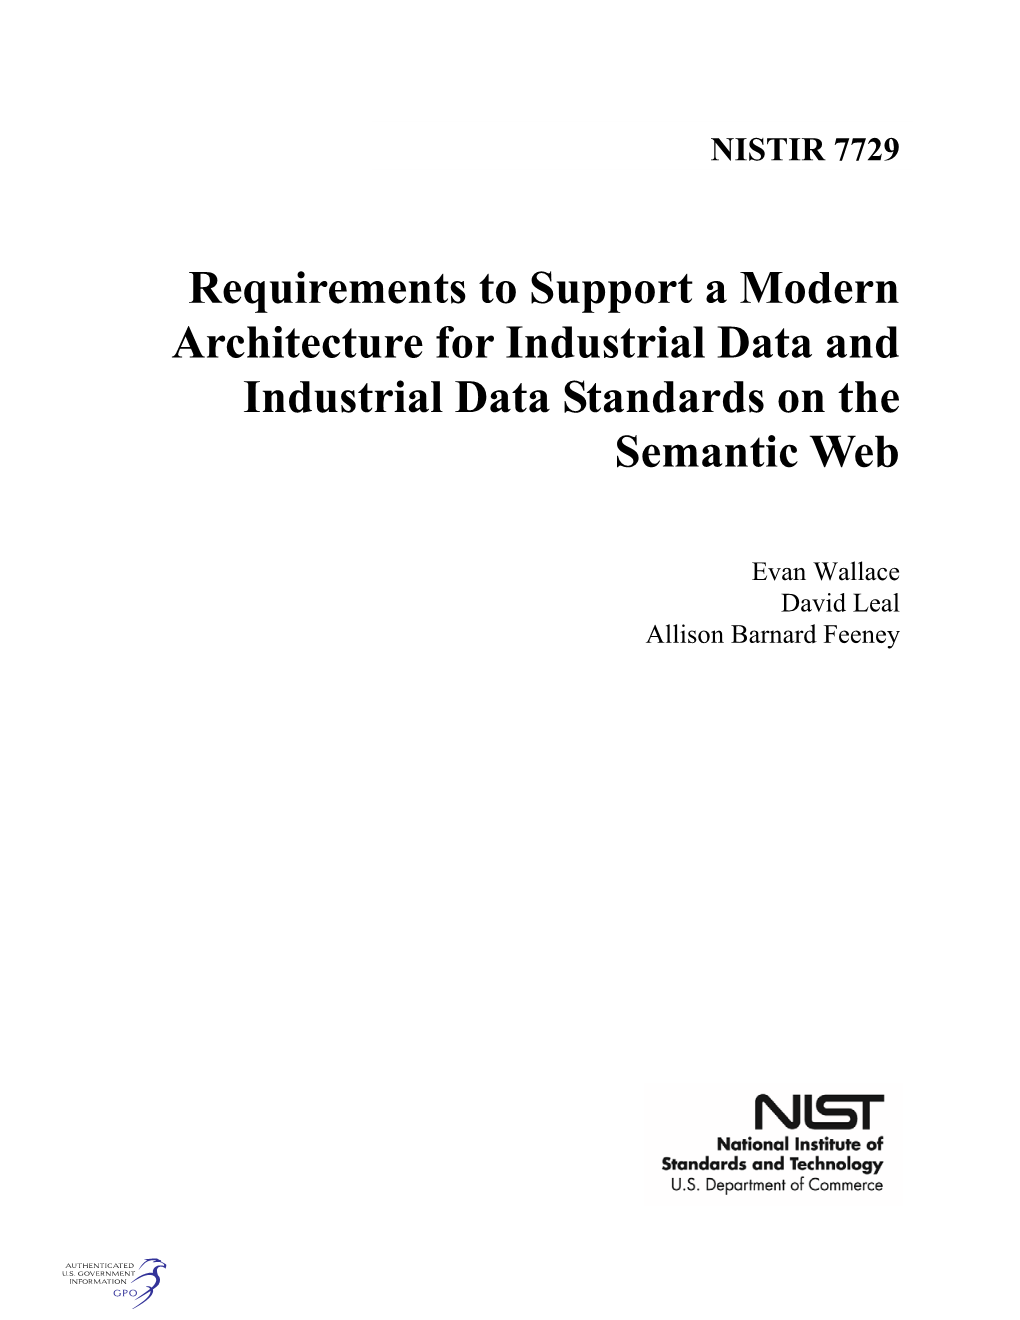 Requirements to Support a Modern Architecture for Industrial Data and Industrial Data Standards on the Semantic Web